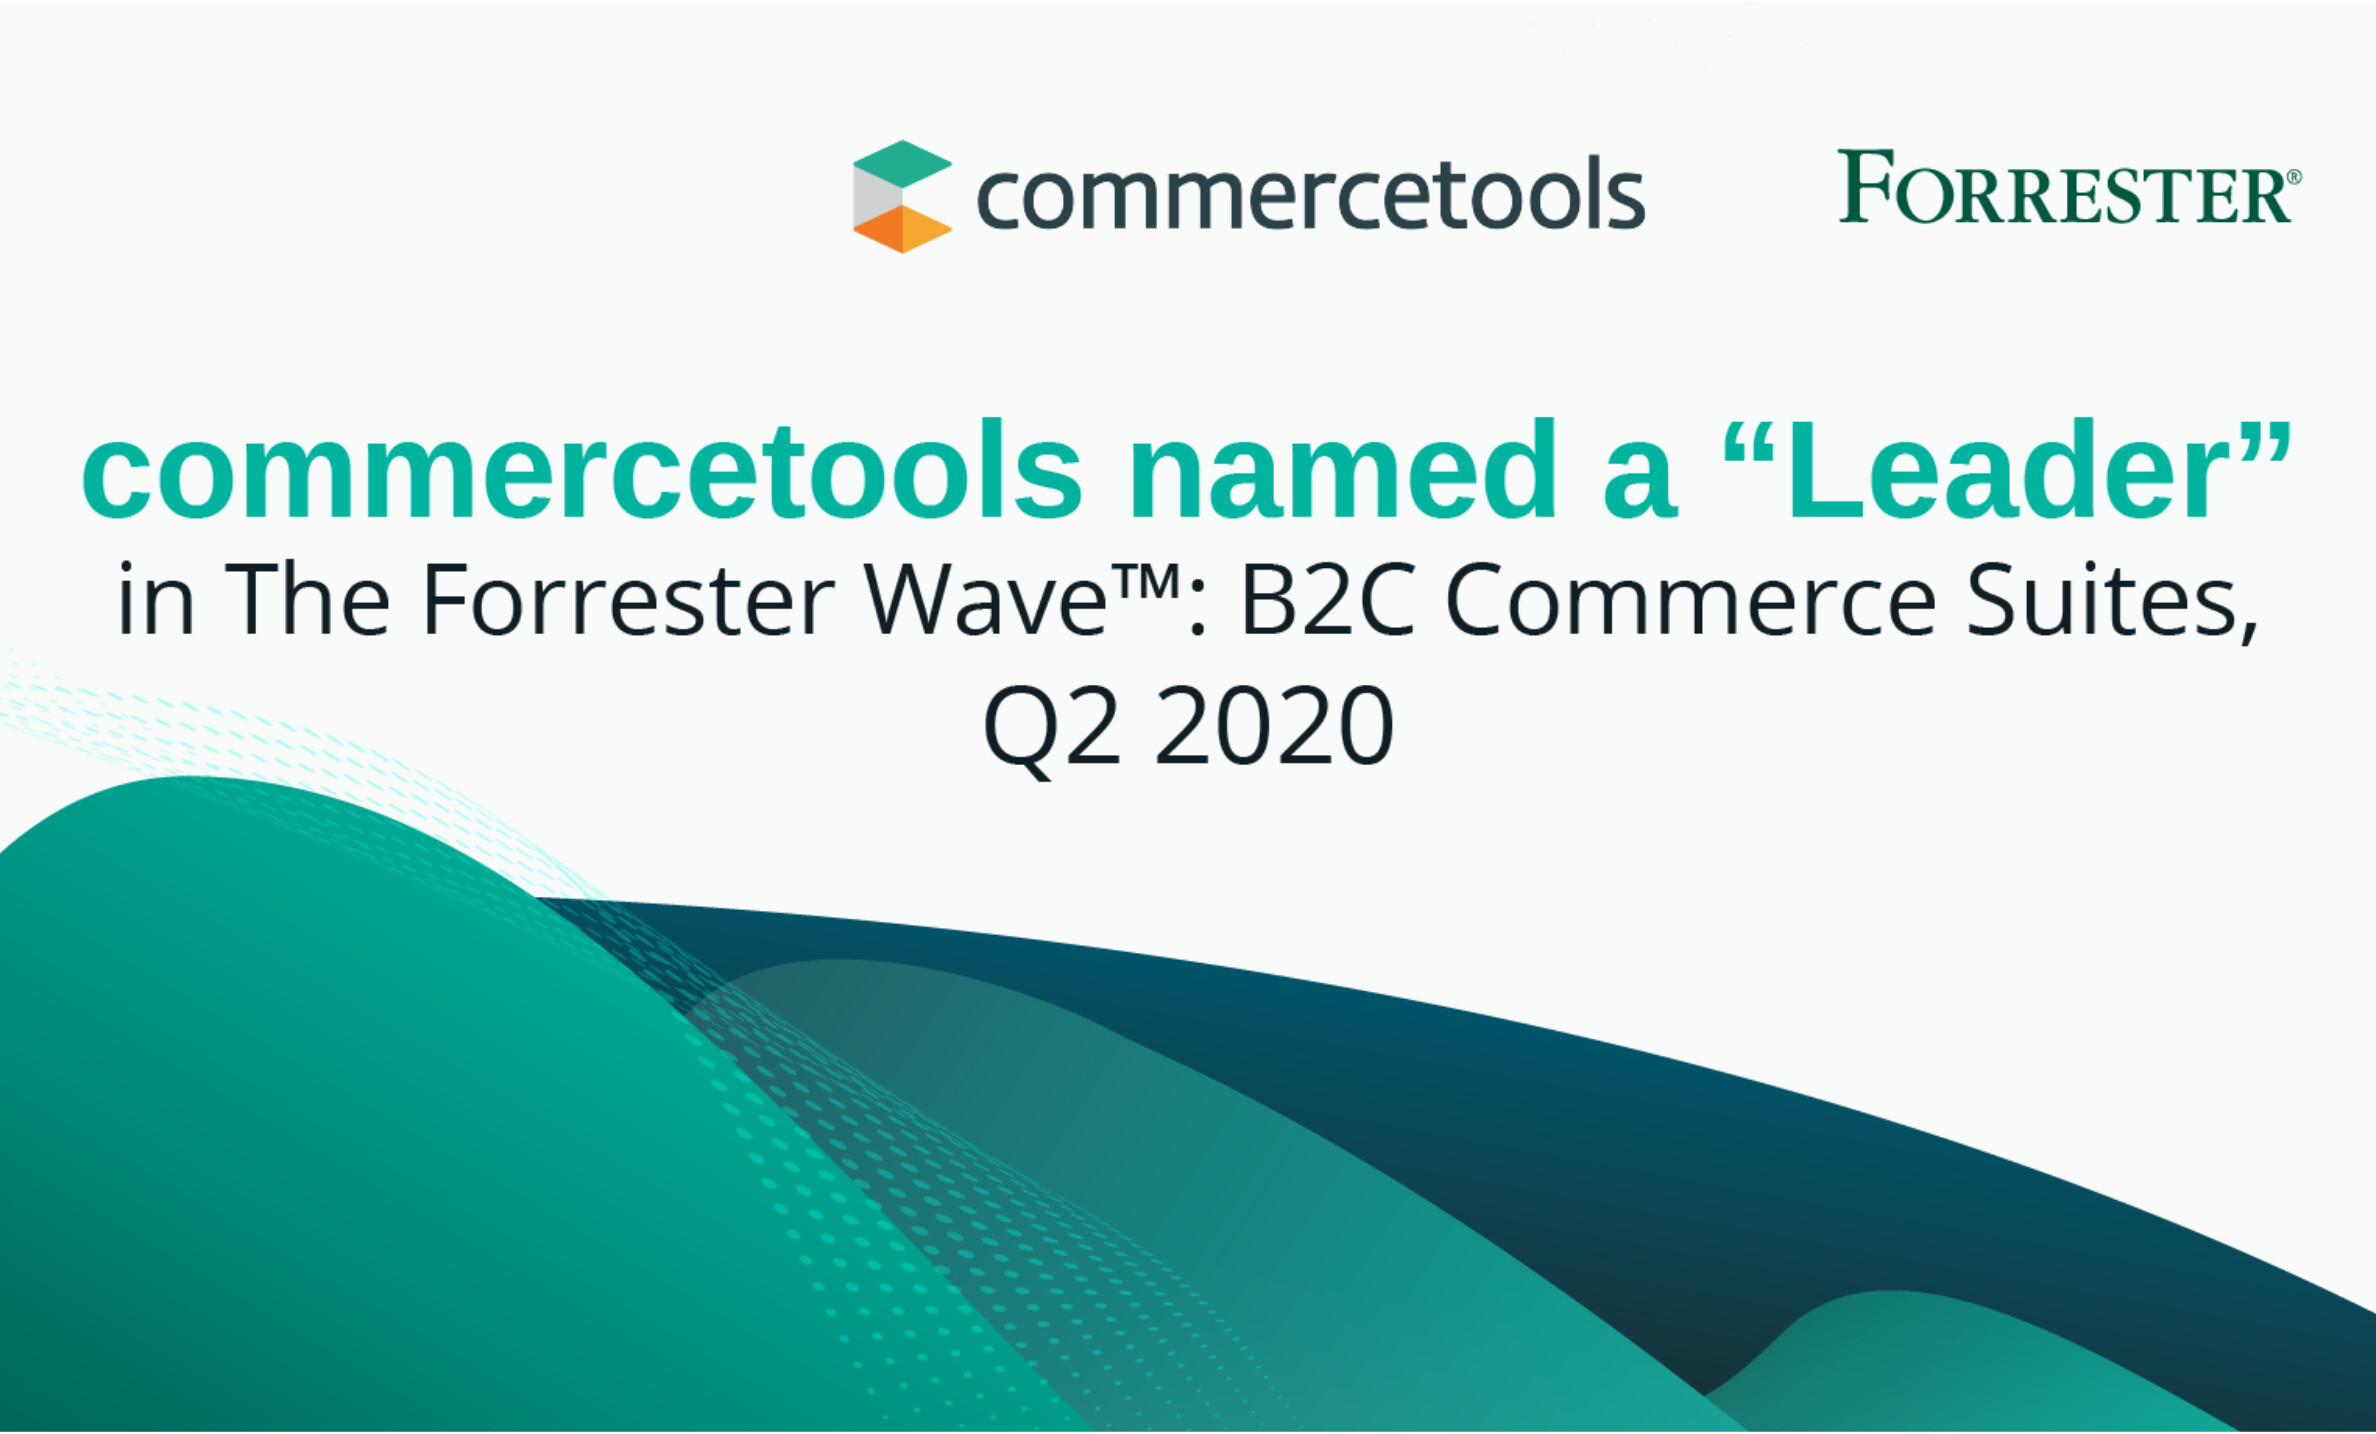 commercetools named a "Leader" in B2C commerce by Forrester